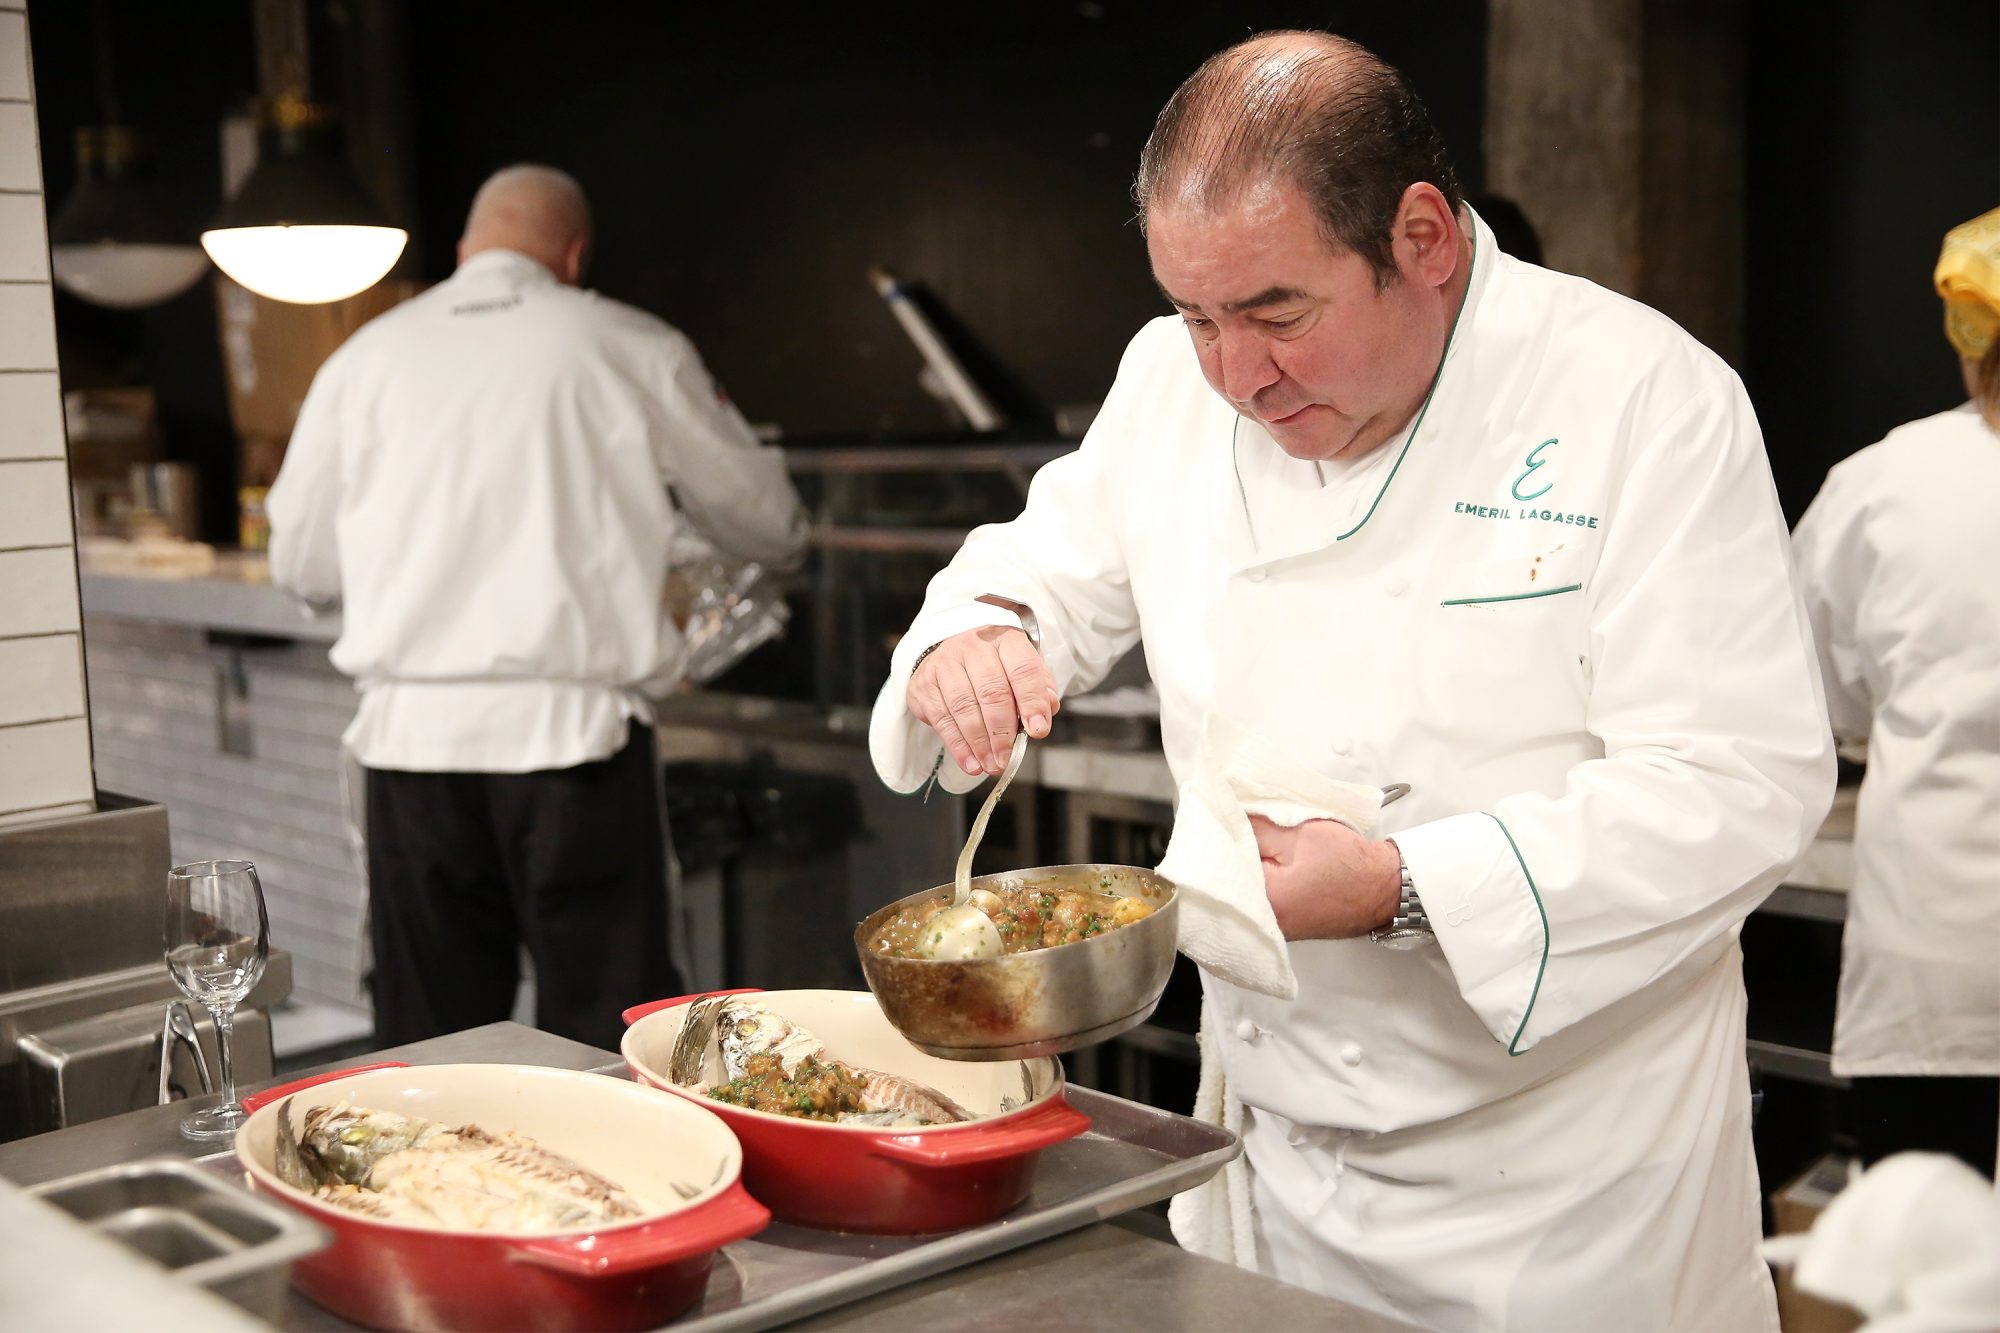 Emeril Lagasse’s Net Worth And Biography